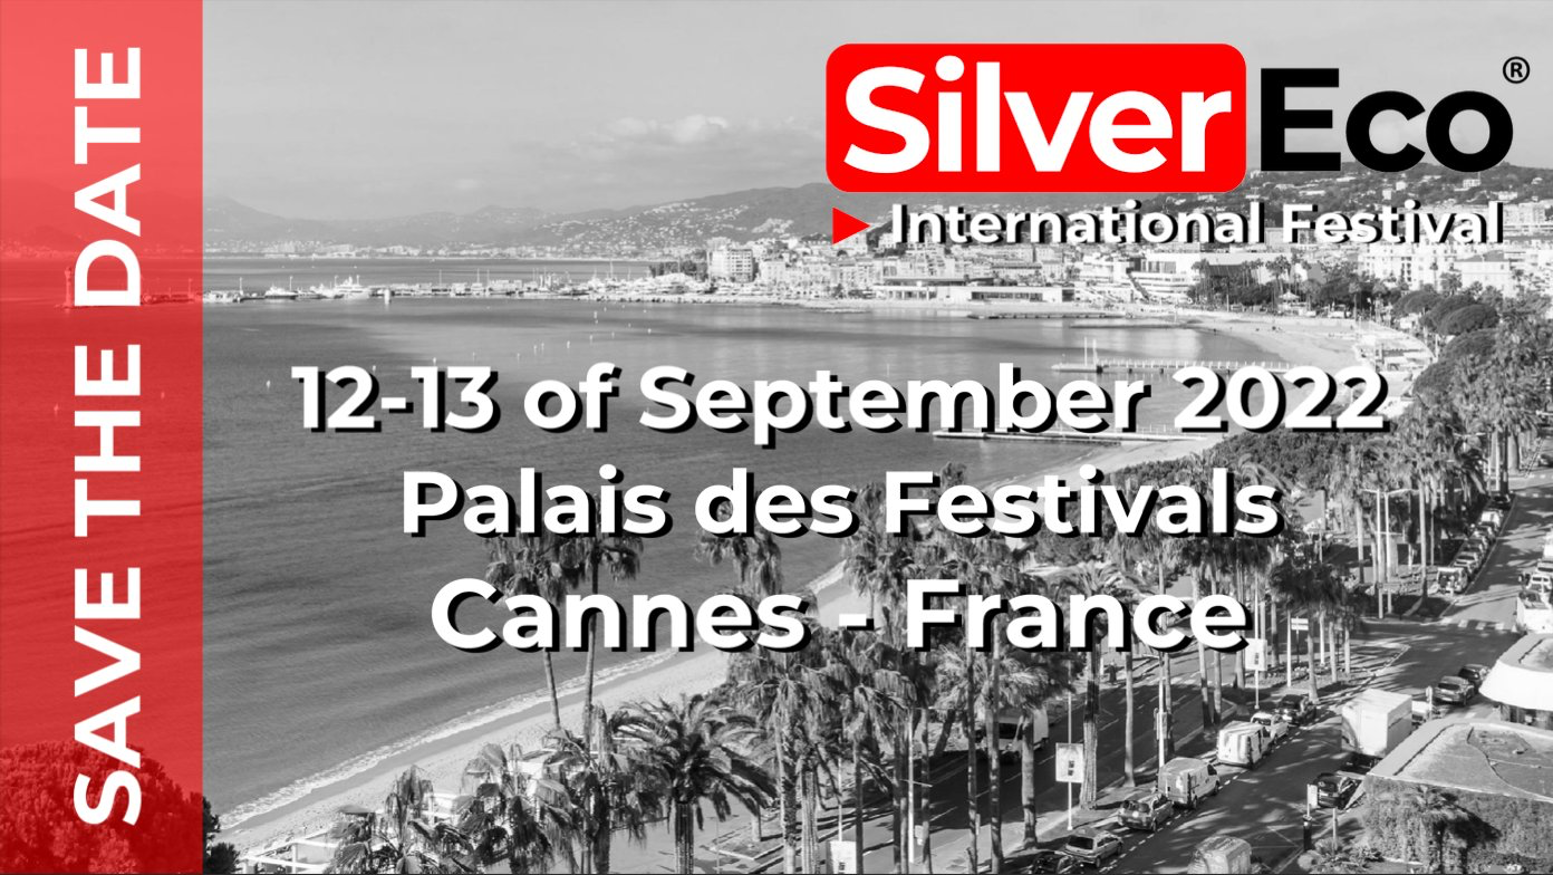 We like to introduce our Partner Event the SilverEco and Ageing Well International Festival￼